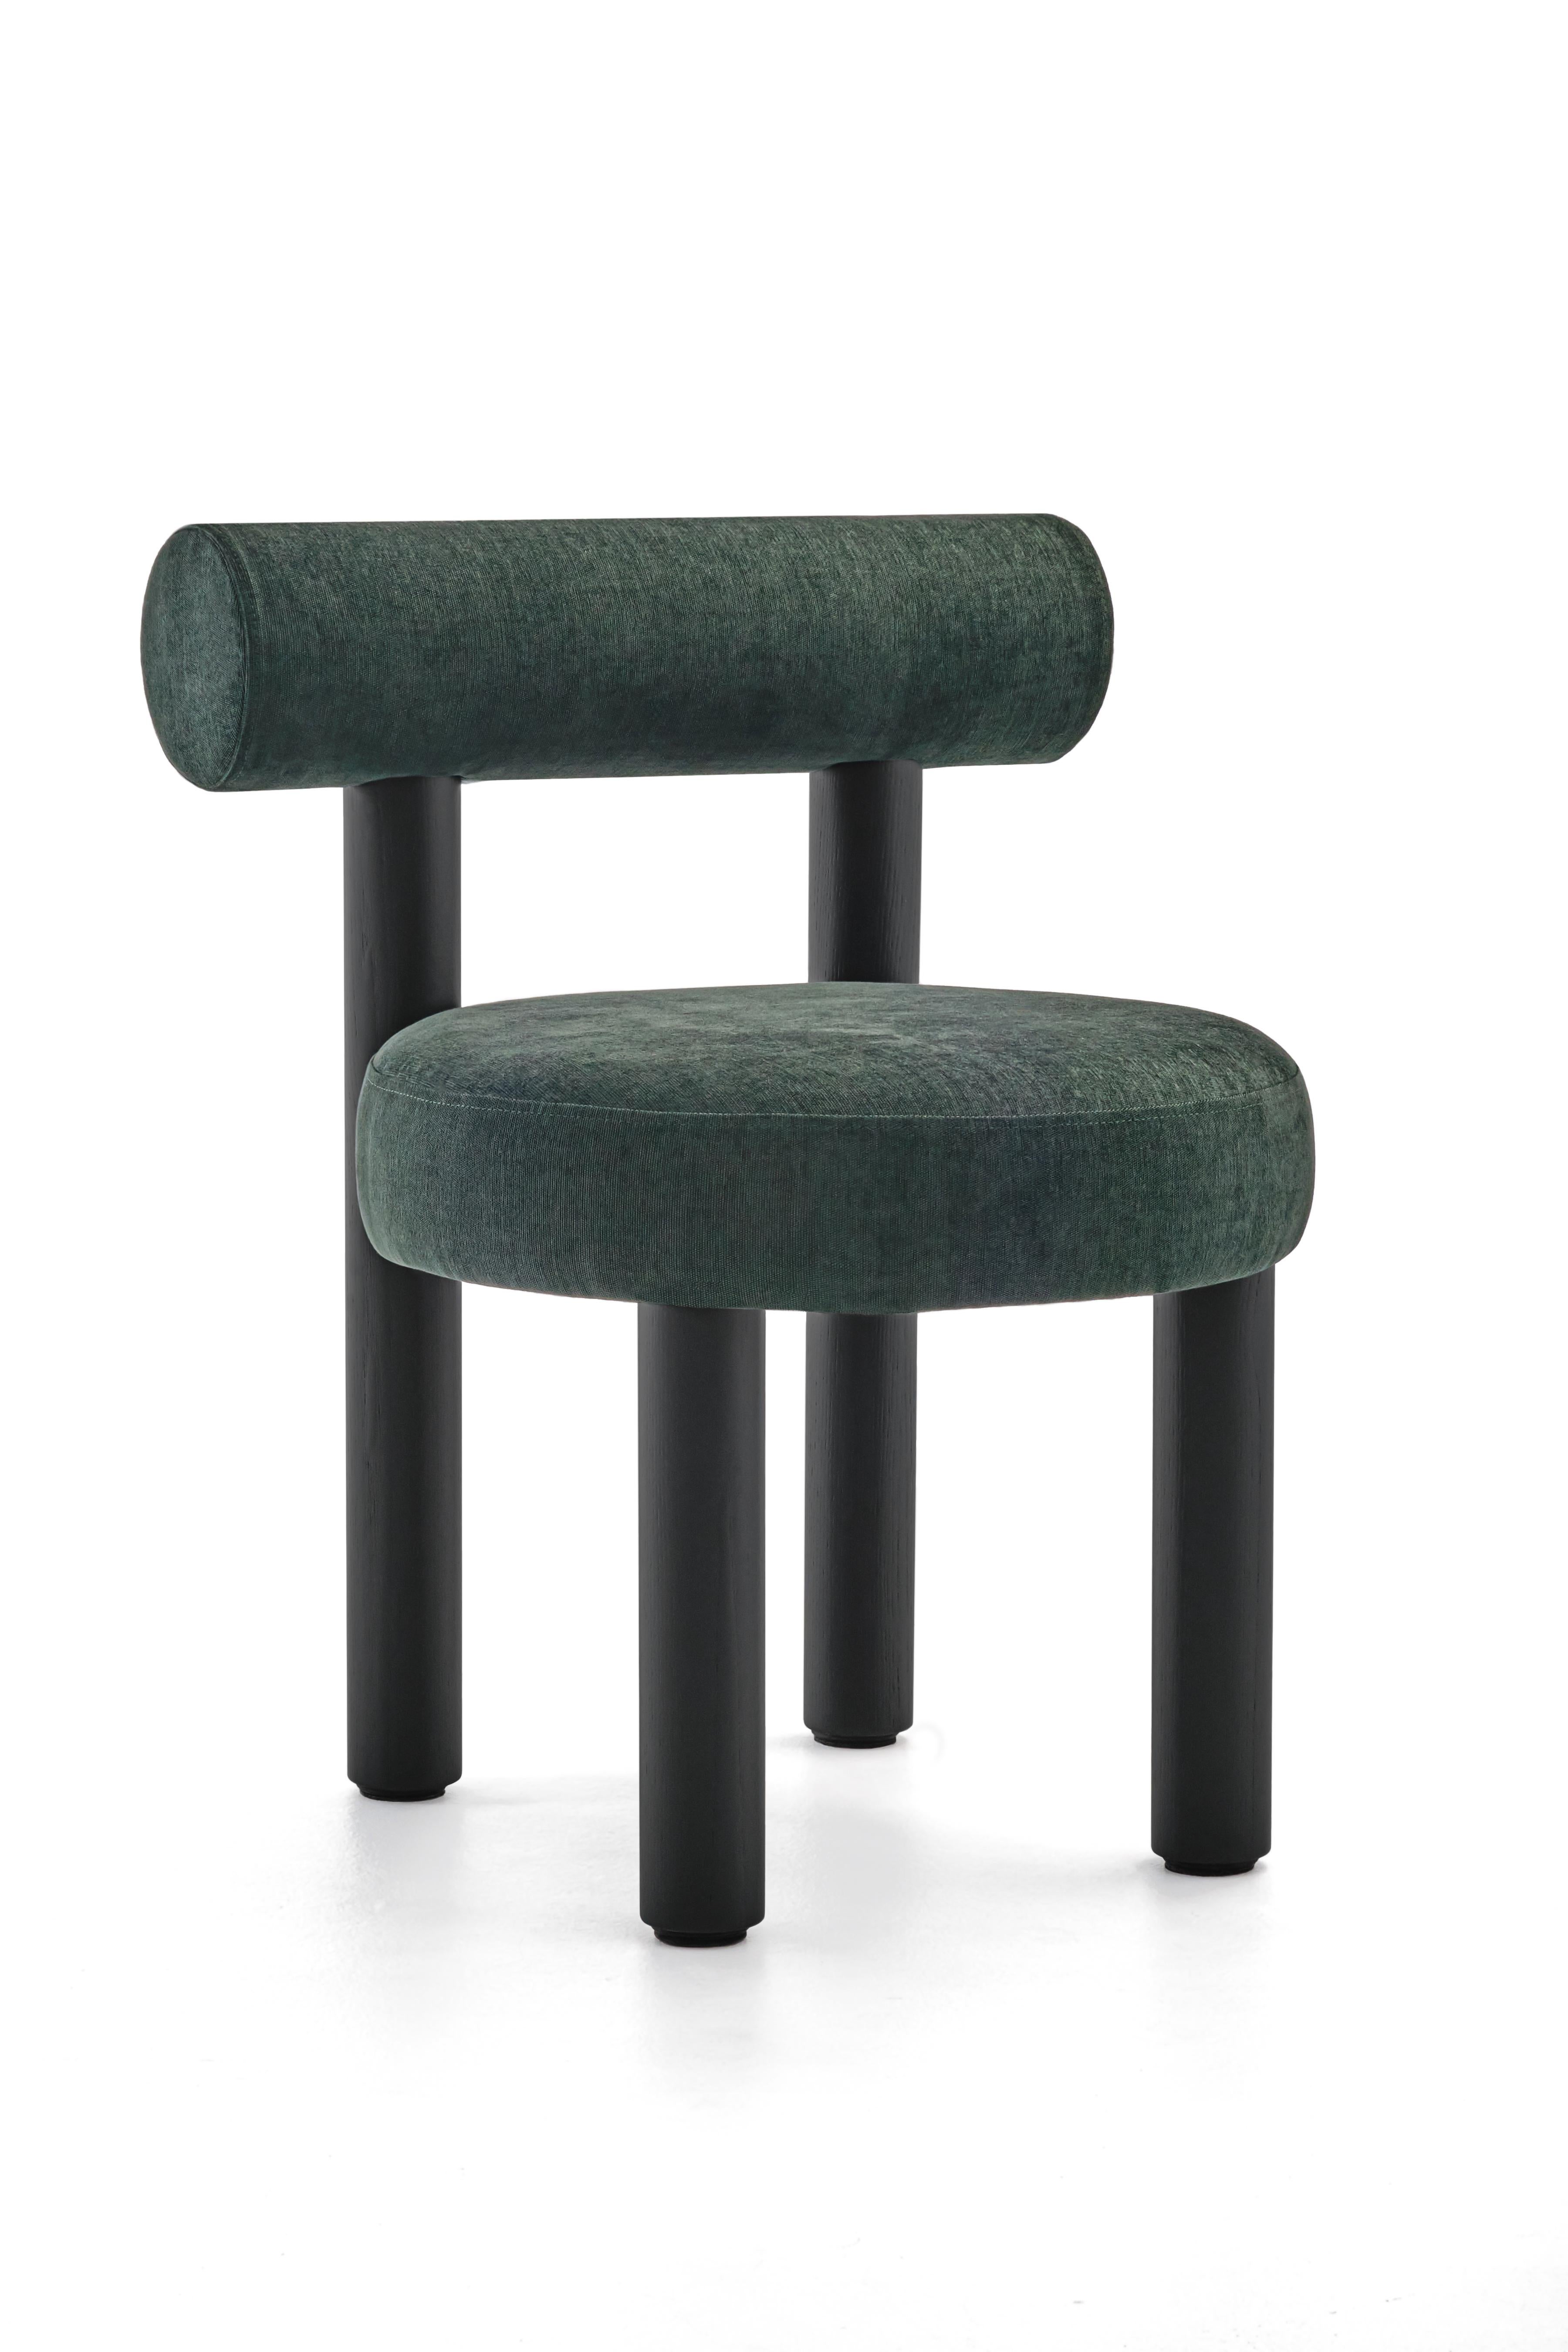 Wool Contemporary Wooden Chair 'Gropius Cs2' by Noom, Green Ranger 68 For Sale